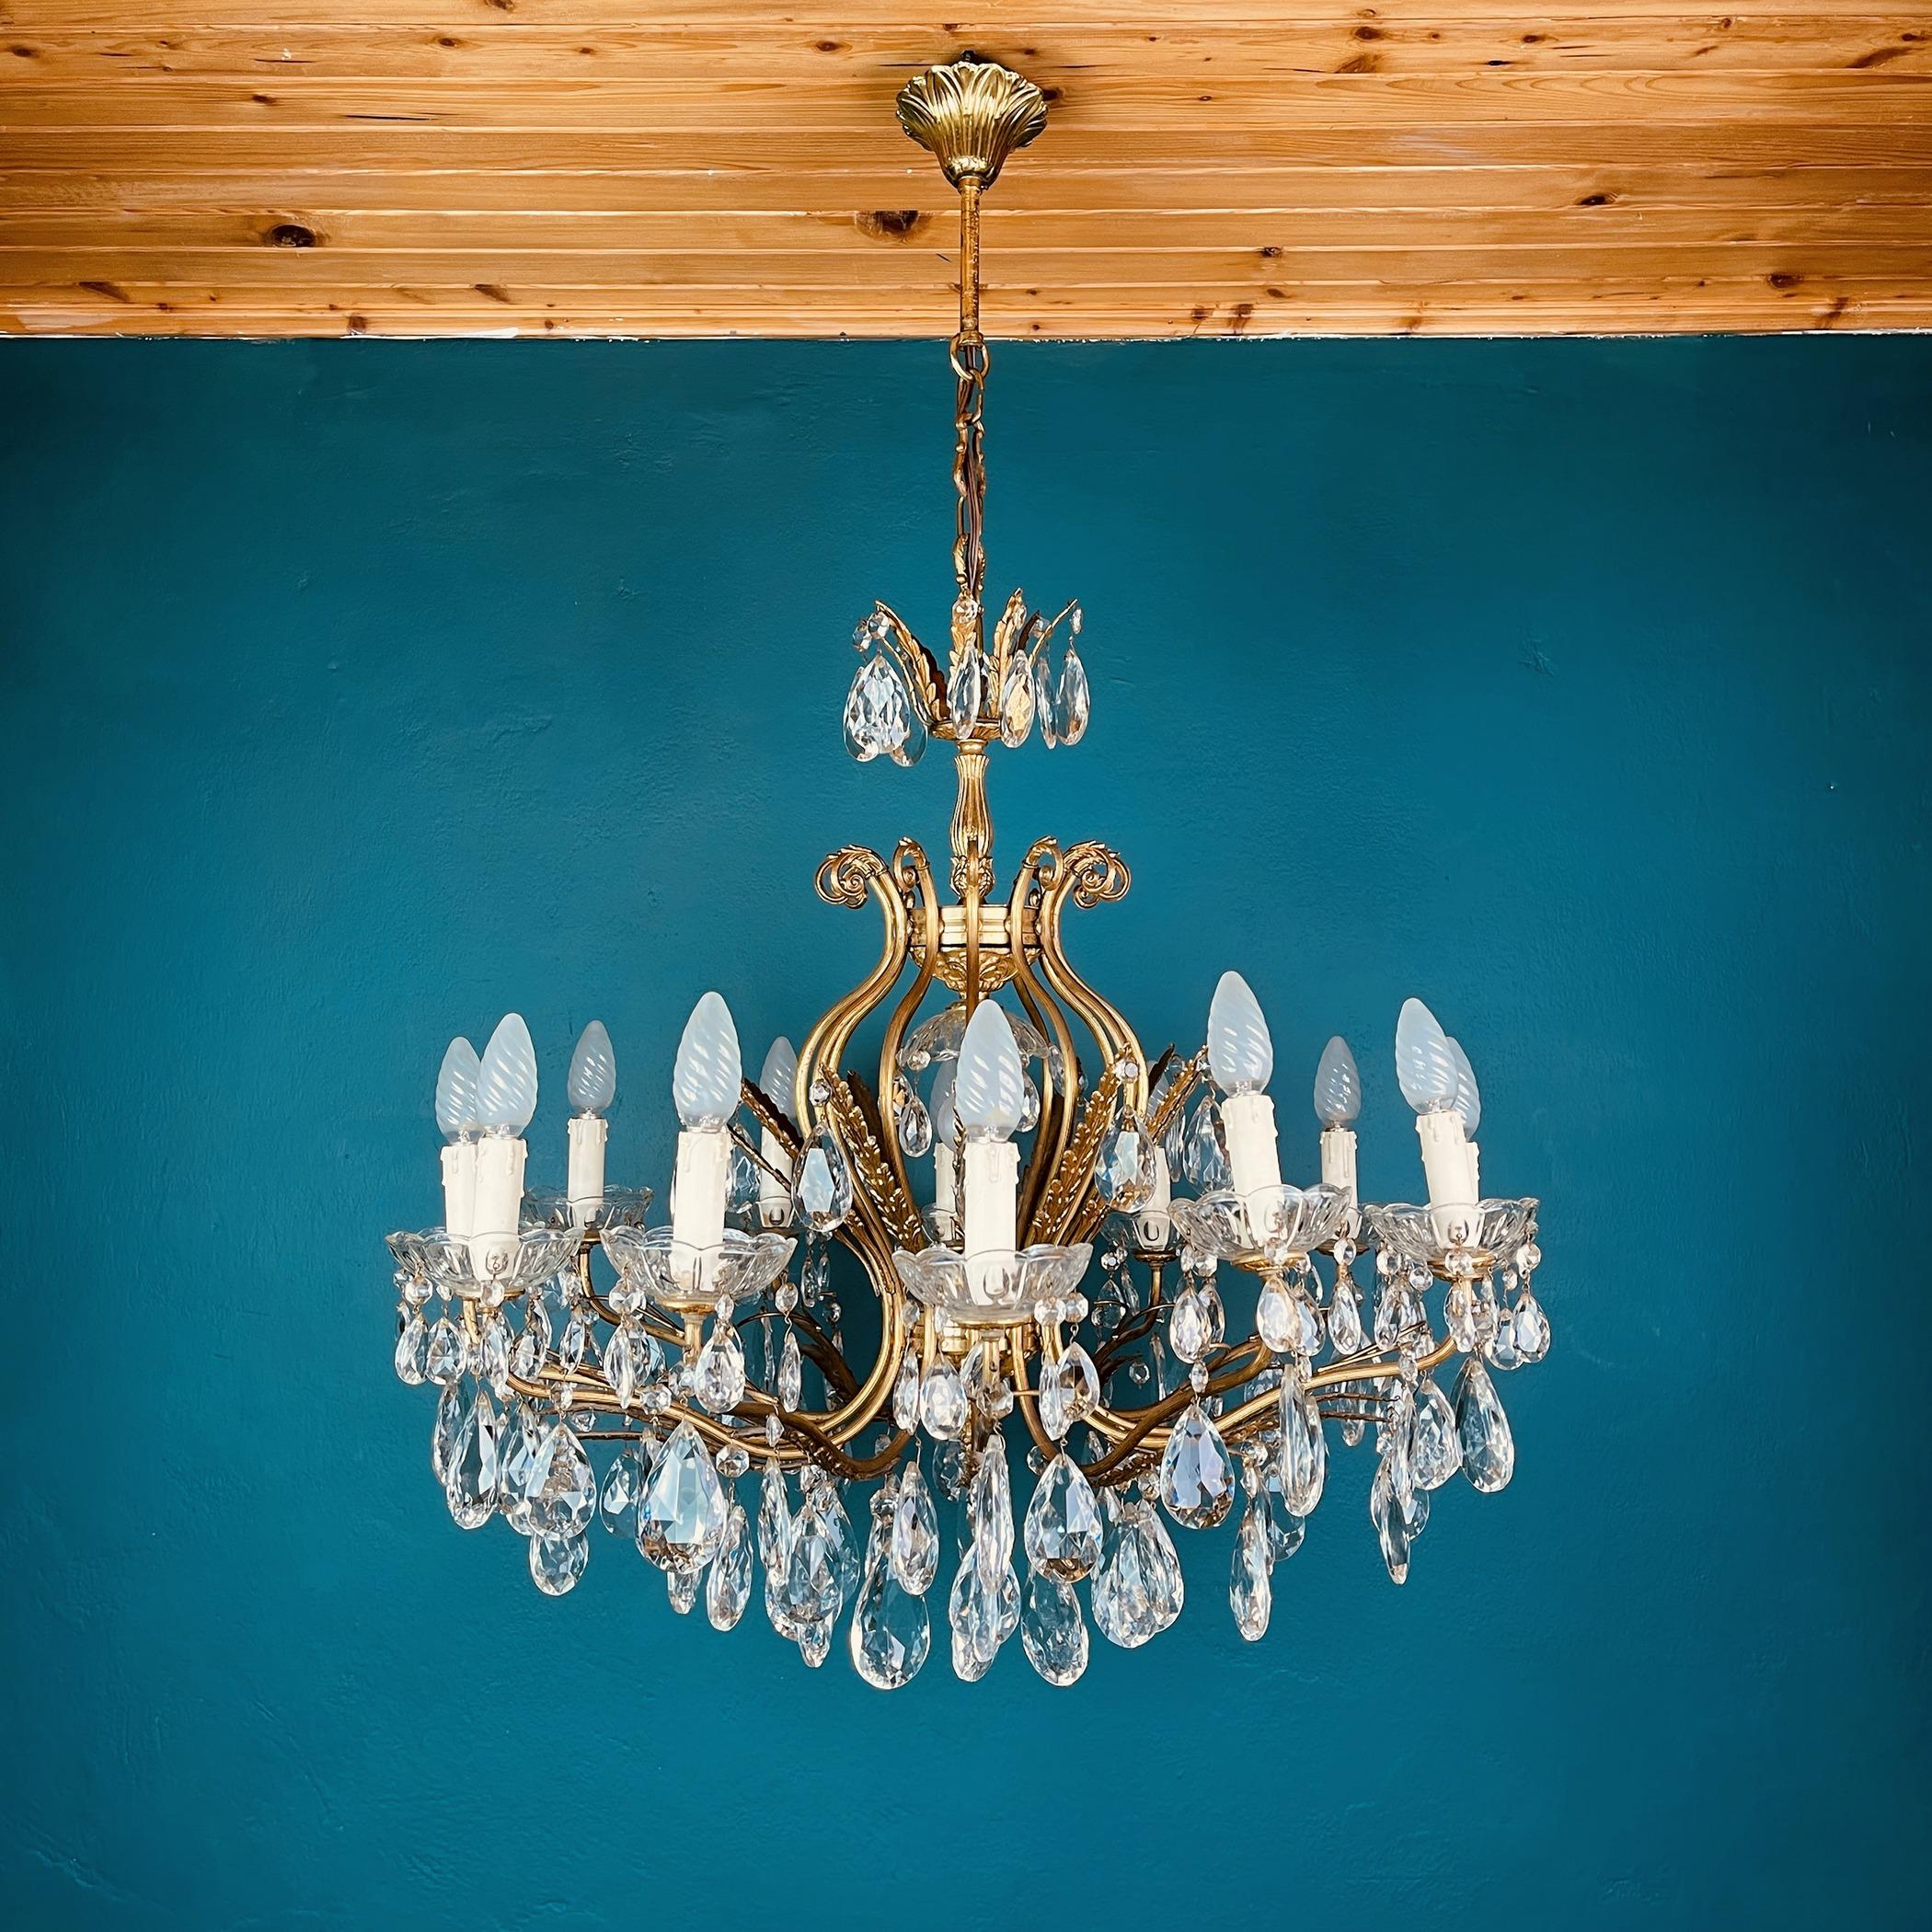 Xl Vintage Crystal Chandelier Italy 1950s Hollywood Regency For Sale 4